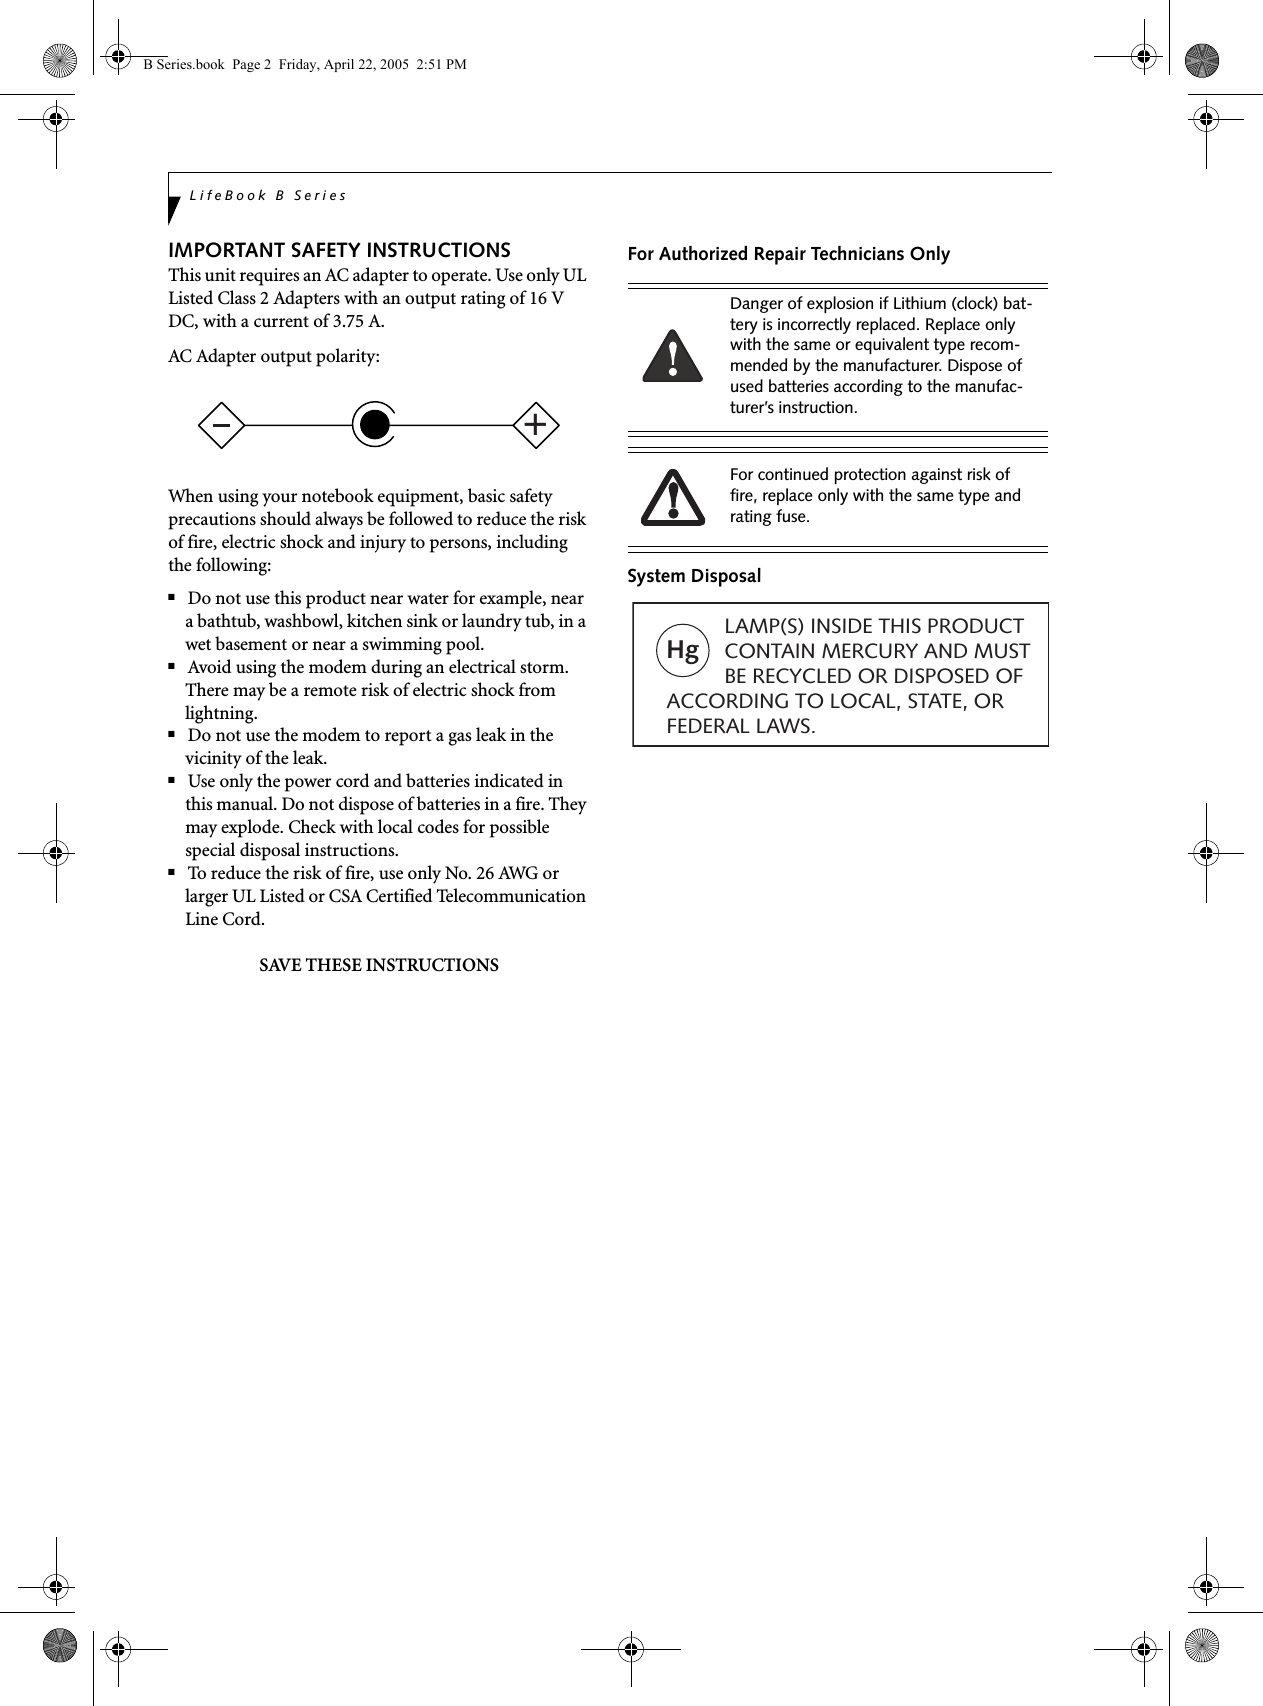 LifeBook B SeriesIMPORTANT SAFETY INSTRUCTIONS This unit requires an AC adapter to operate. Use only UL Listed Class 2 Adapters with an output rating of 16 V DC, with a current of 3.75 A.AC Adapter output polarity:When using your notebook equipment, basic safety precautions should always be followed to reduce the risk of fire, electric shock and injury to persons, including the following:■Do not use this product near water for example, near a bathtub, washbowl, kitchen sink or laundry tub, in a wet basement or near a swimming pool.■Avoid using the modem during an electrical storm. There may be a remote risk of electric shock from lightning.■Do not use the modem to report a gas leak in the vicinity of the leak.■Use only the power cord and batteries indicated in this manual. Do not dispose of batteries in a fire. They may explode. Check with local codes for possible special disposal instructions.■To reduce the risk of fire, use only No. 26 AWG or larger UL Listed or CSA Certified Telecommunication Line Cord.SAVE THESE INSTRUCTIONSFor Authorized Repair Technicians OnlySystem Disposal+Danger of explosion if Lithium (clock) bat-tery is incorrectly replaced. Replace only with the same or equivalent type recom-mended by the manufacturer. Dispose of used batteries according to the manufac-turer’s instruction.For continued protection against risk of fire, replace only with the same type and rating fuse.Hg          LAMP(S) INSIDE THIS PRODUCT            CONTAIN MERCURY AND MUST          BE RECYCLED OR DISPOSED OF ACCORDING TO LOCAL, STATE, ORFEDERAL LAWS.B Series.book  Page 2  Friday, April 22, 2005  2:51 PM